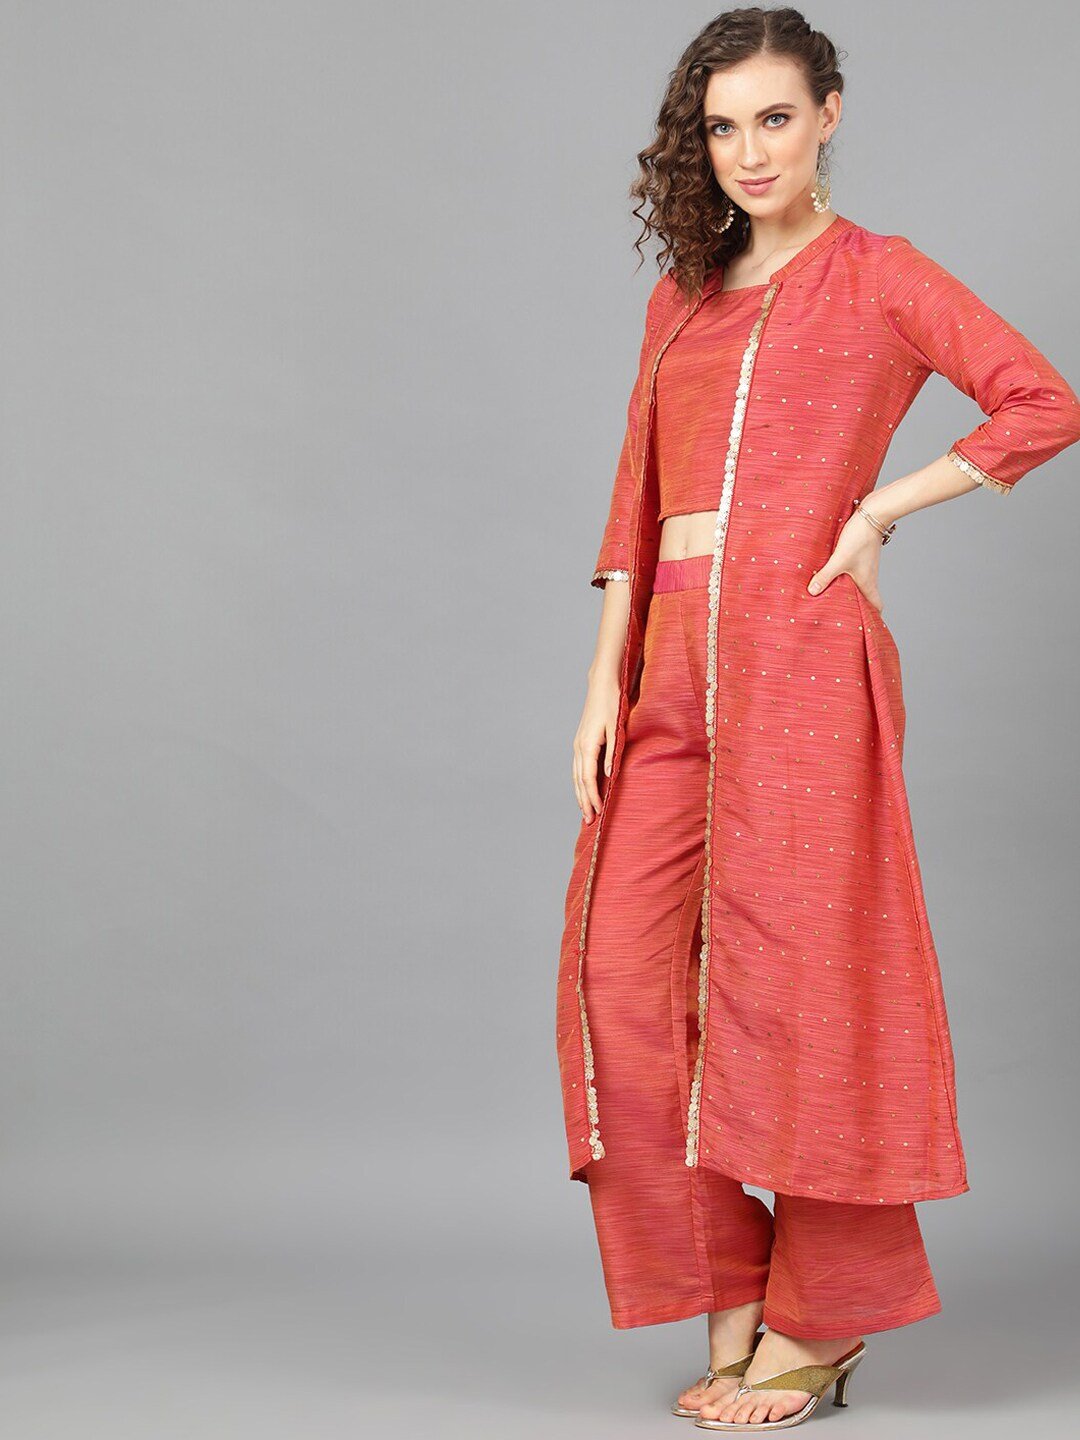 Women's Self Design Top with Palazzos - AKS